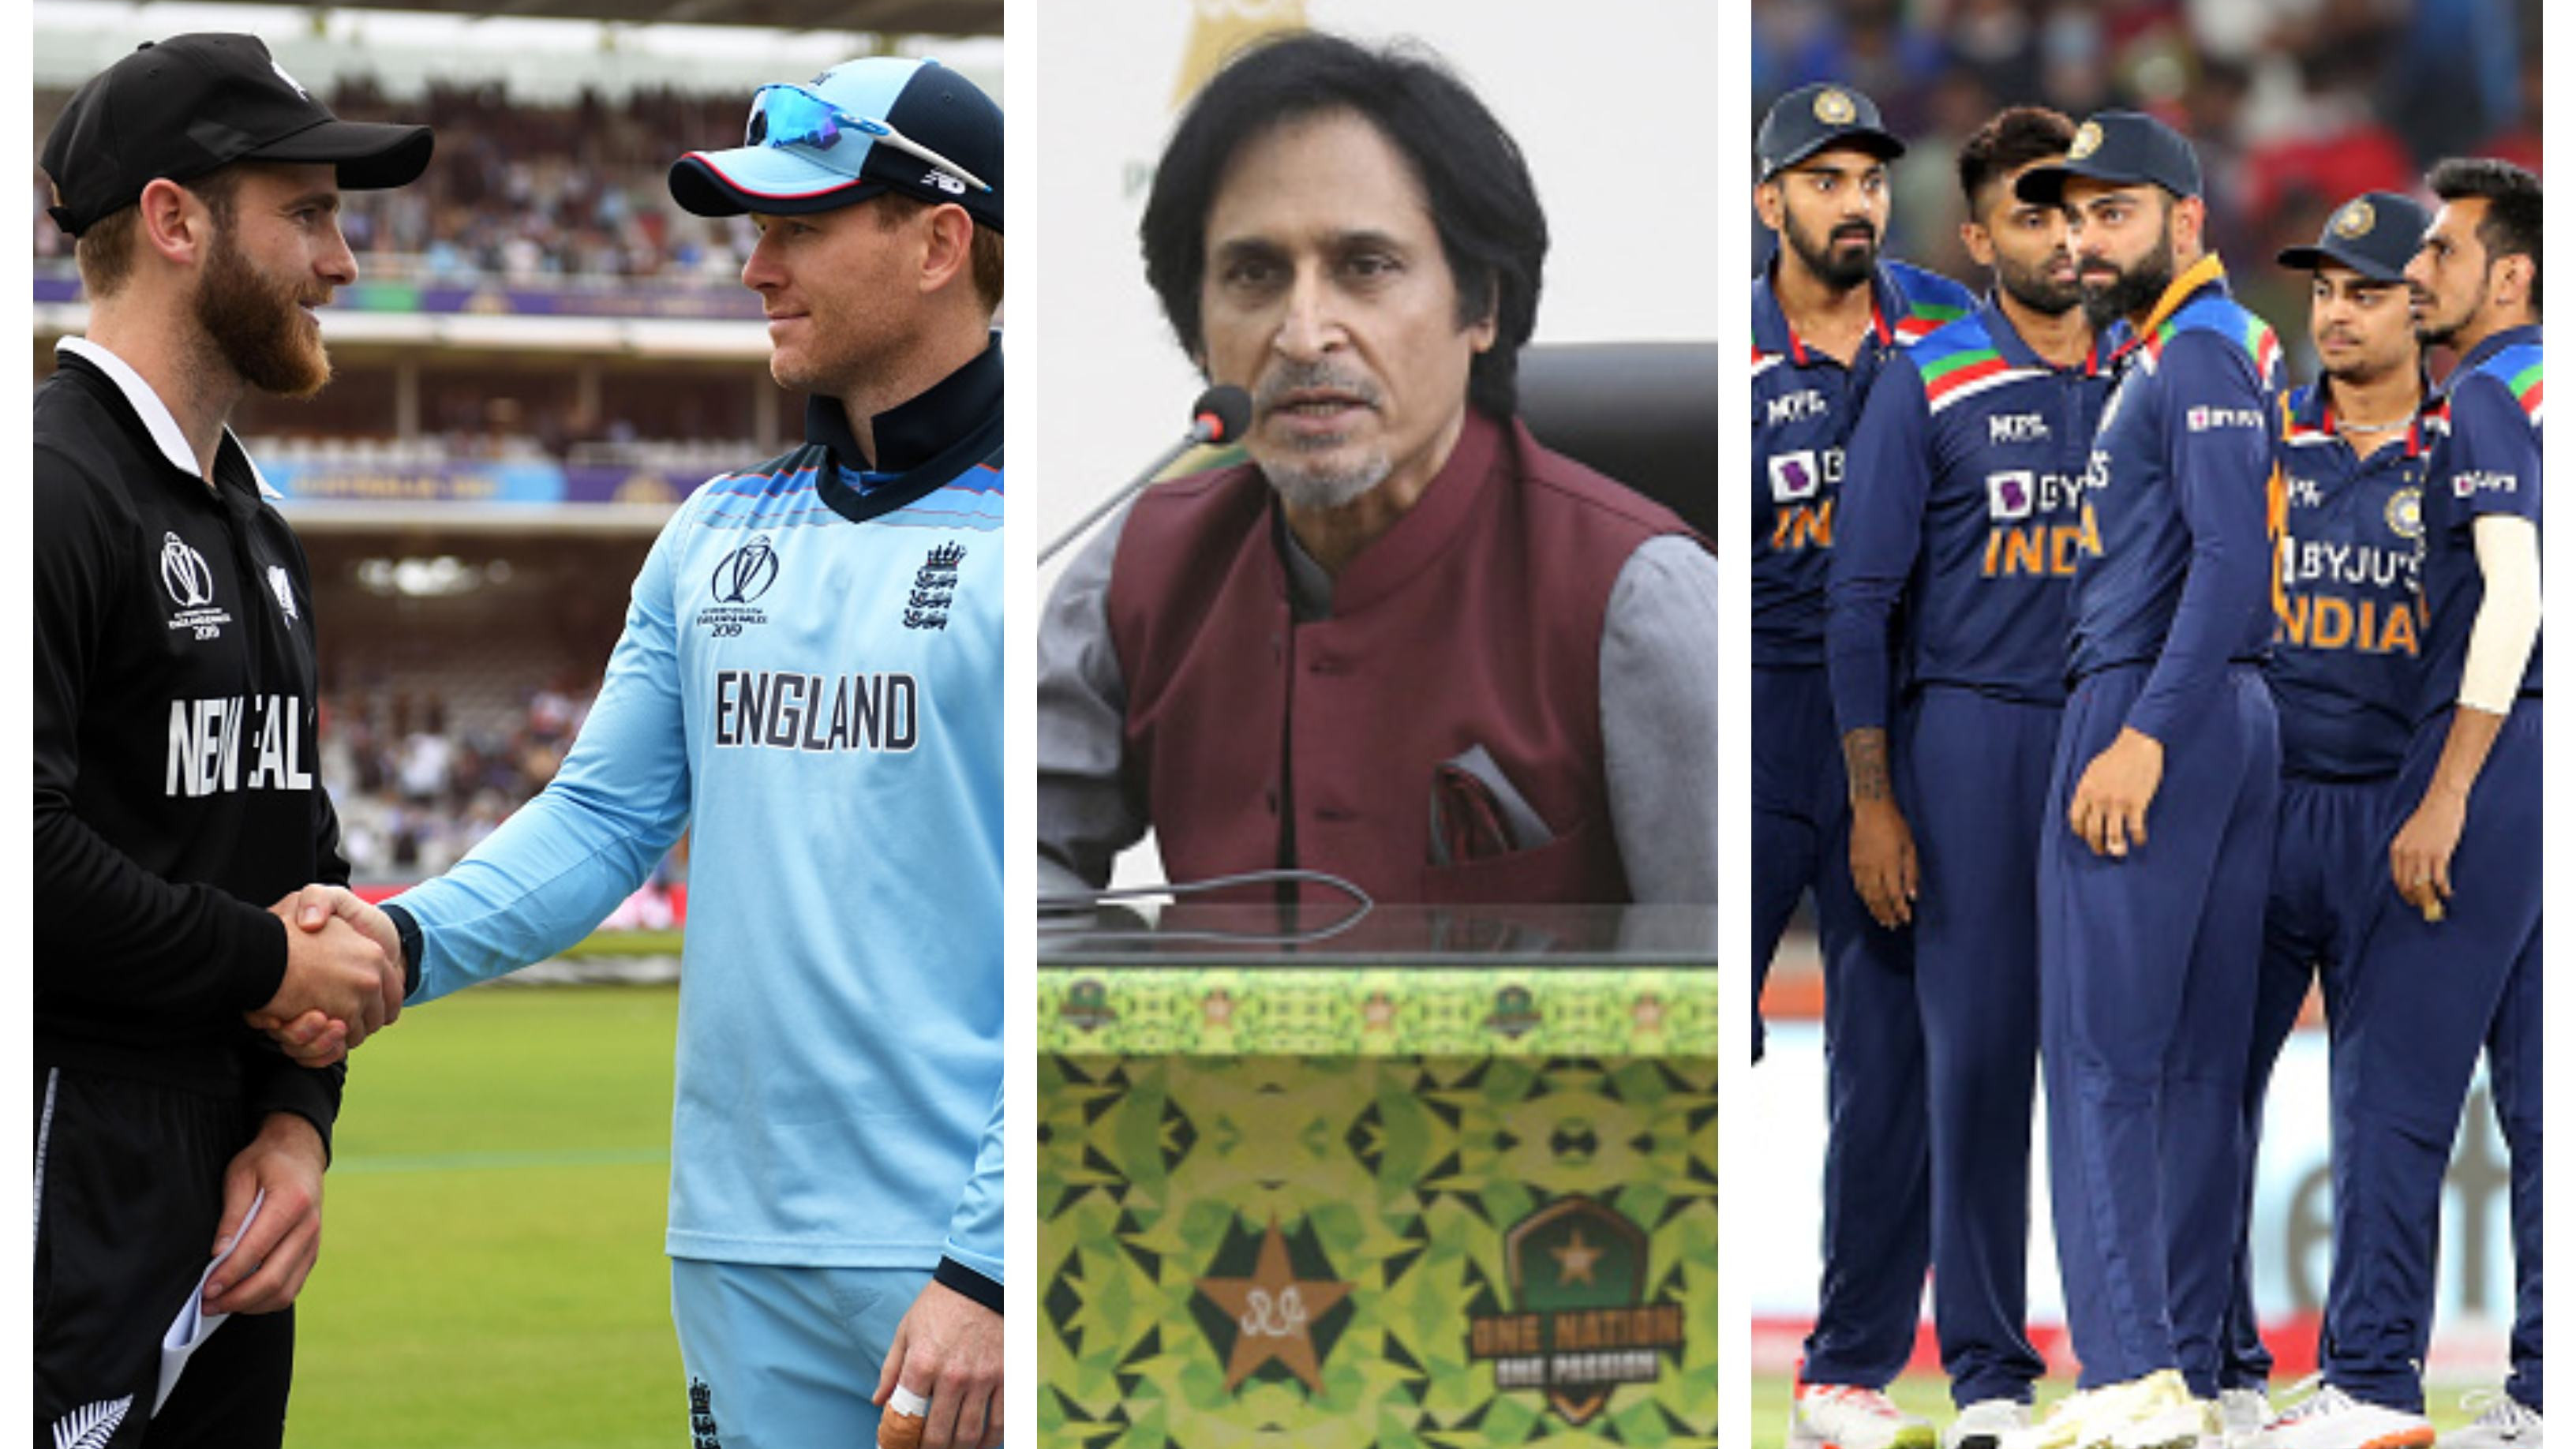 “We had neighbours India in our target, now add two more teams”, Ramiz Raja after New Zealand, England pull out